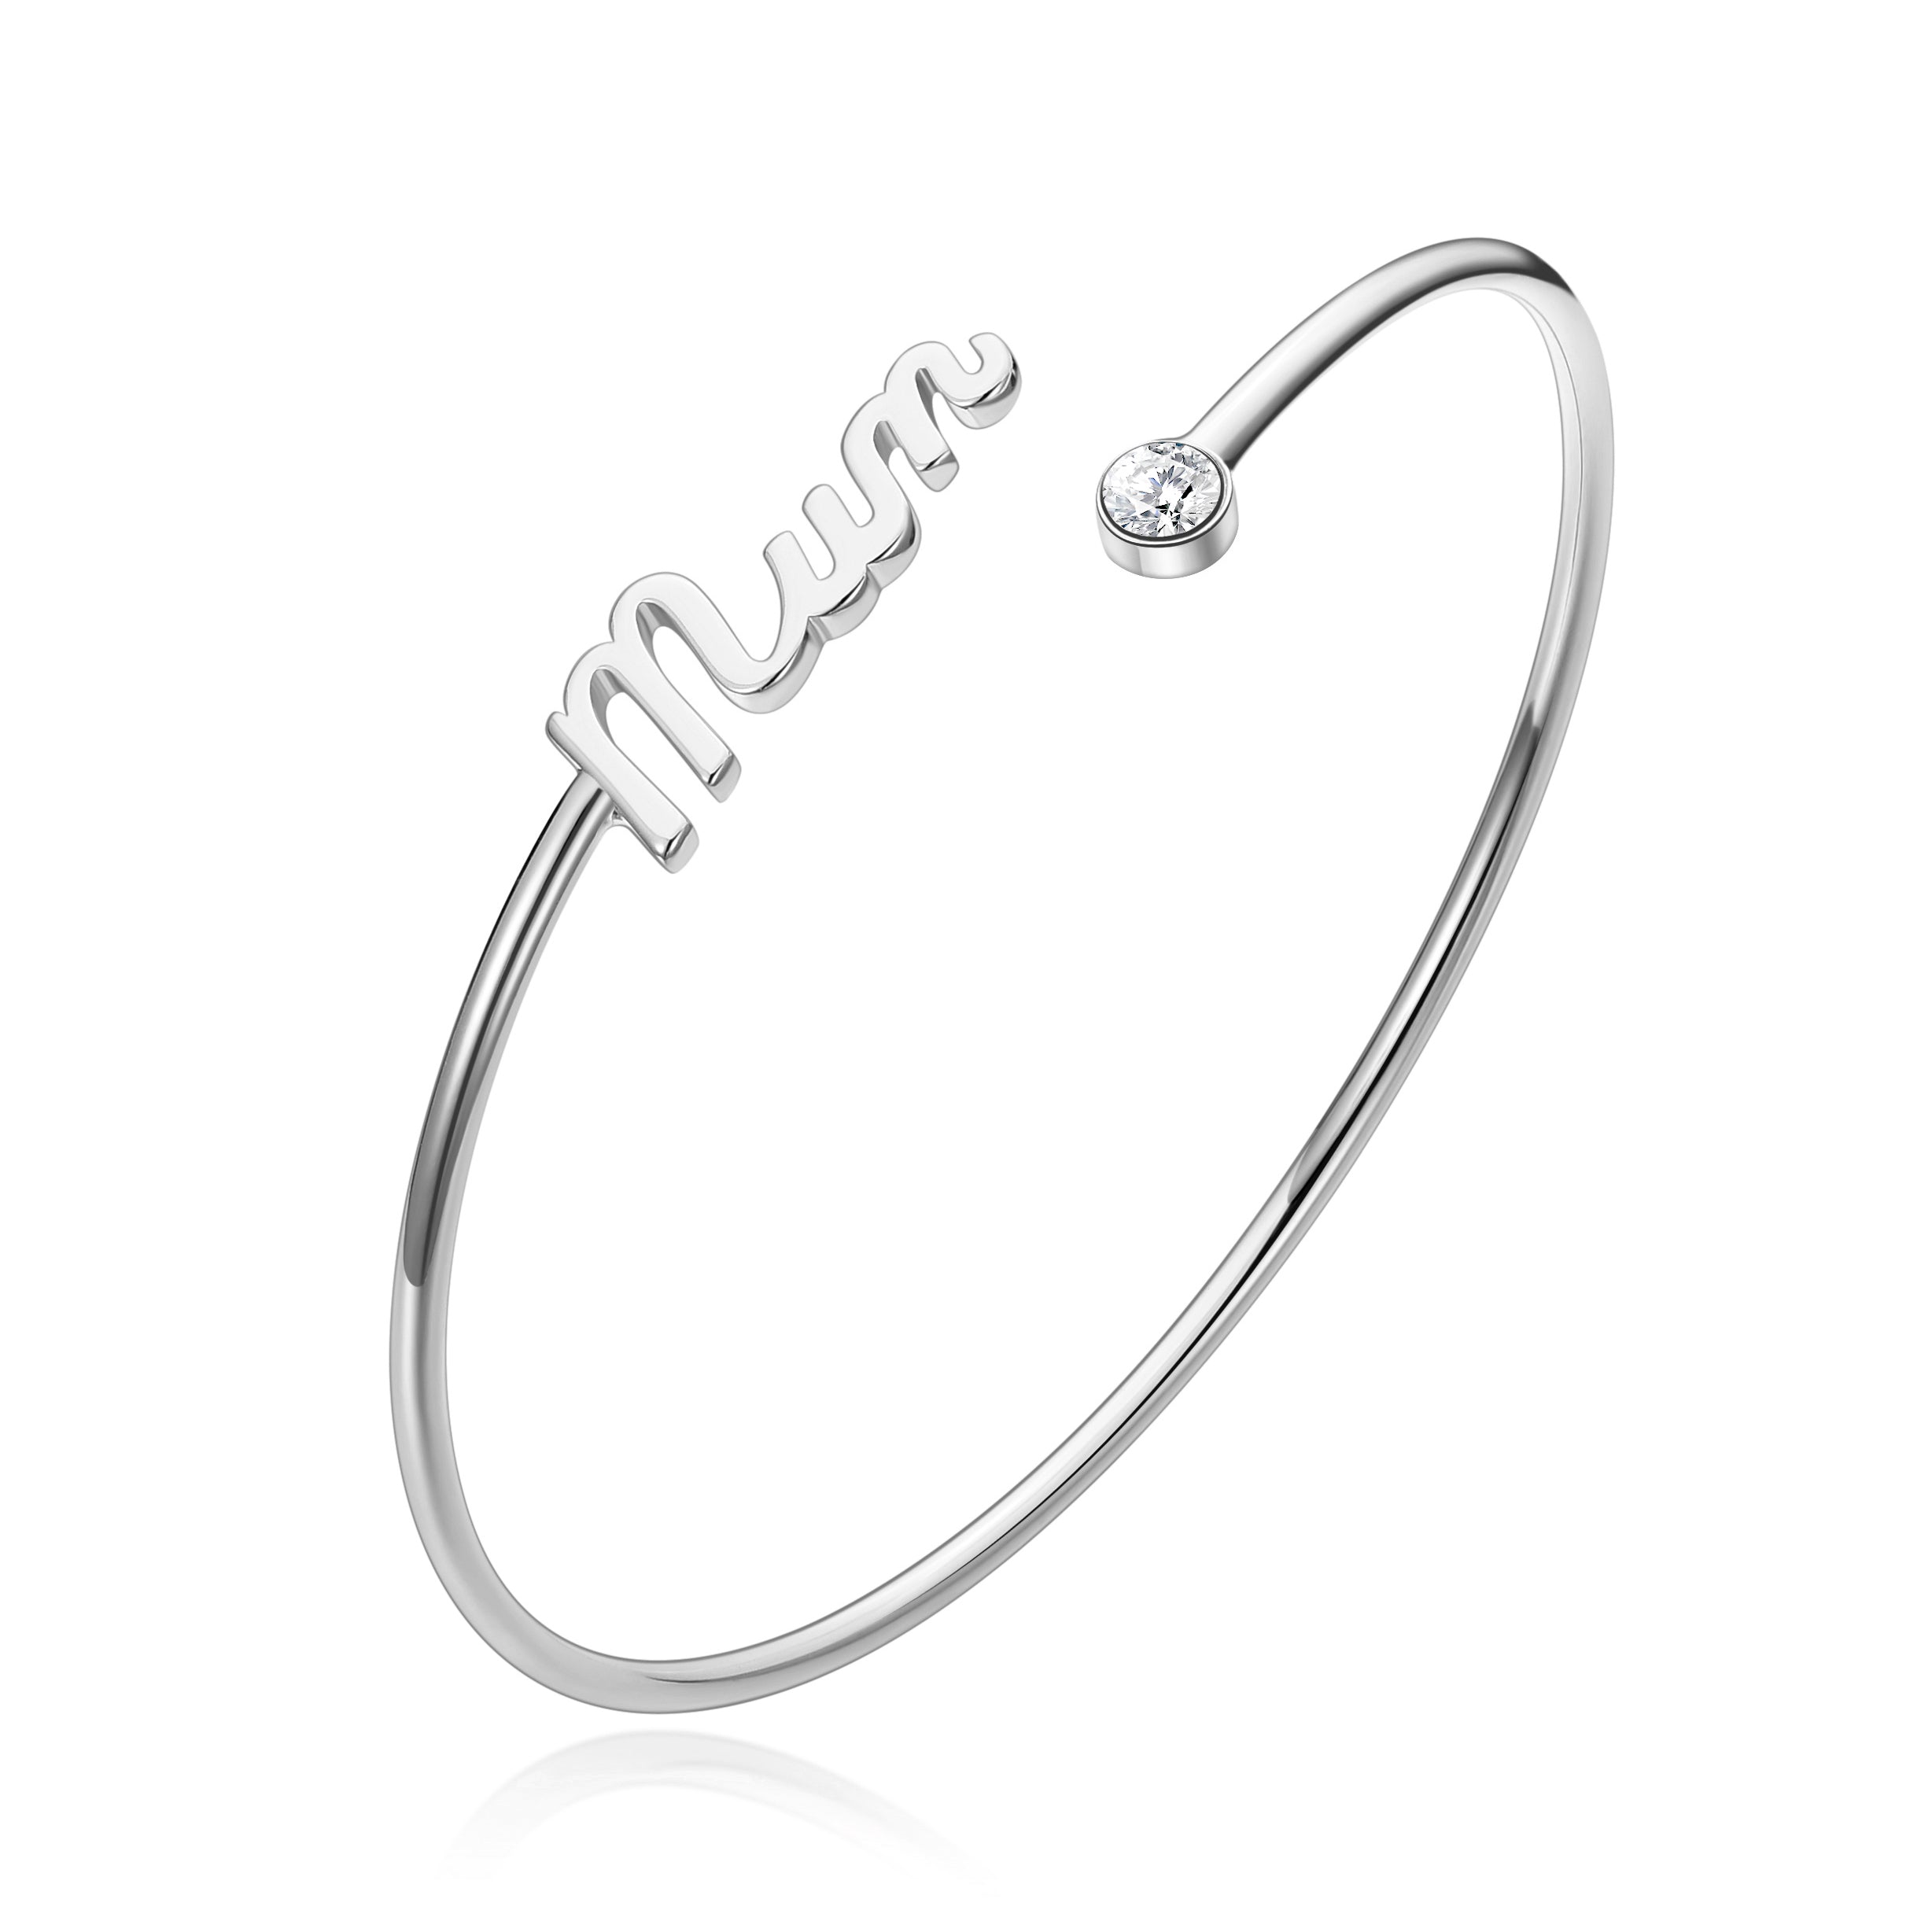 Silver Plated Mum Cuff Bangle Created with Zircondia® Crystals by Philip Jones Jewellery